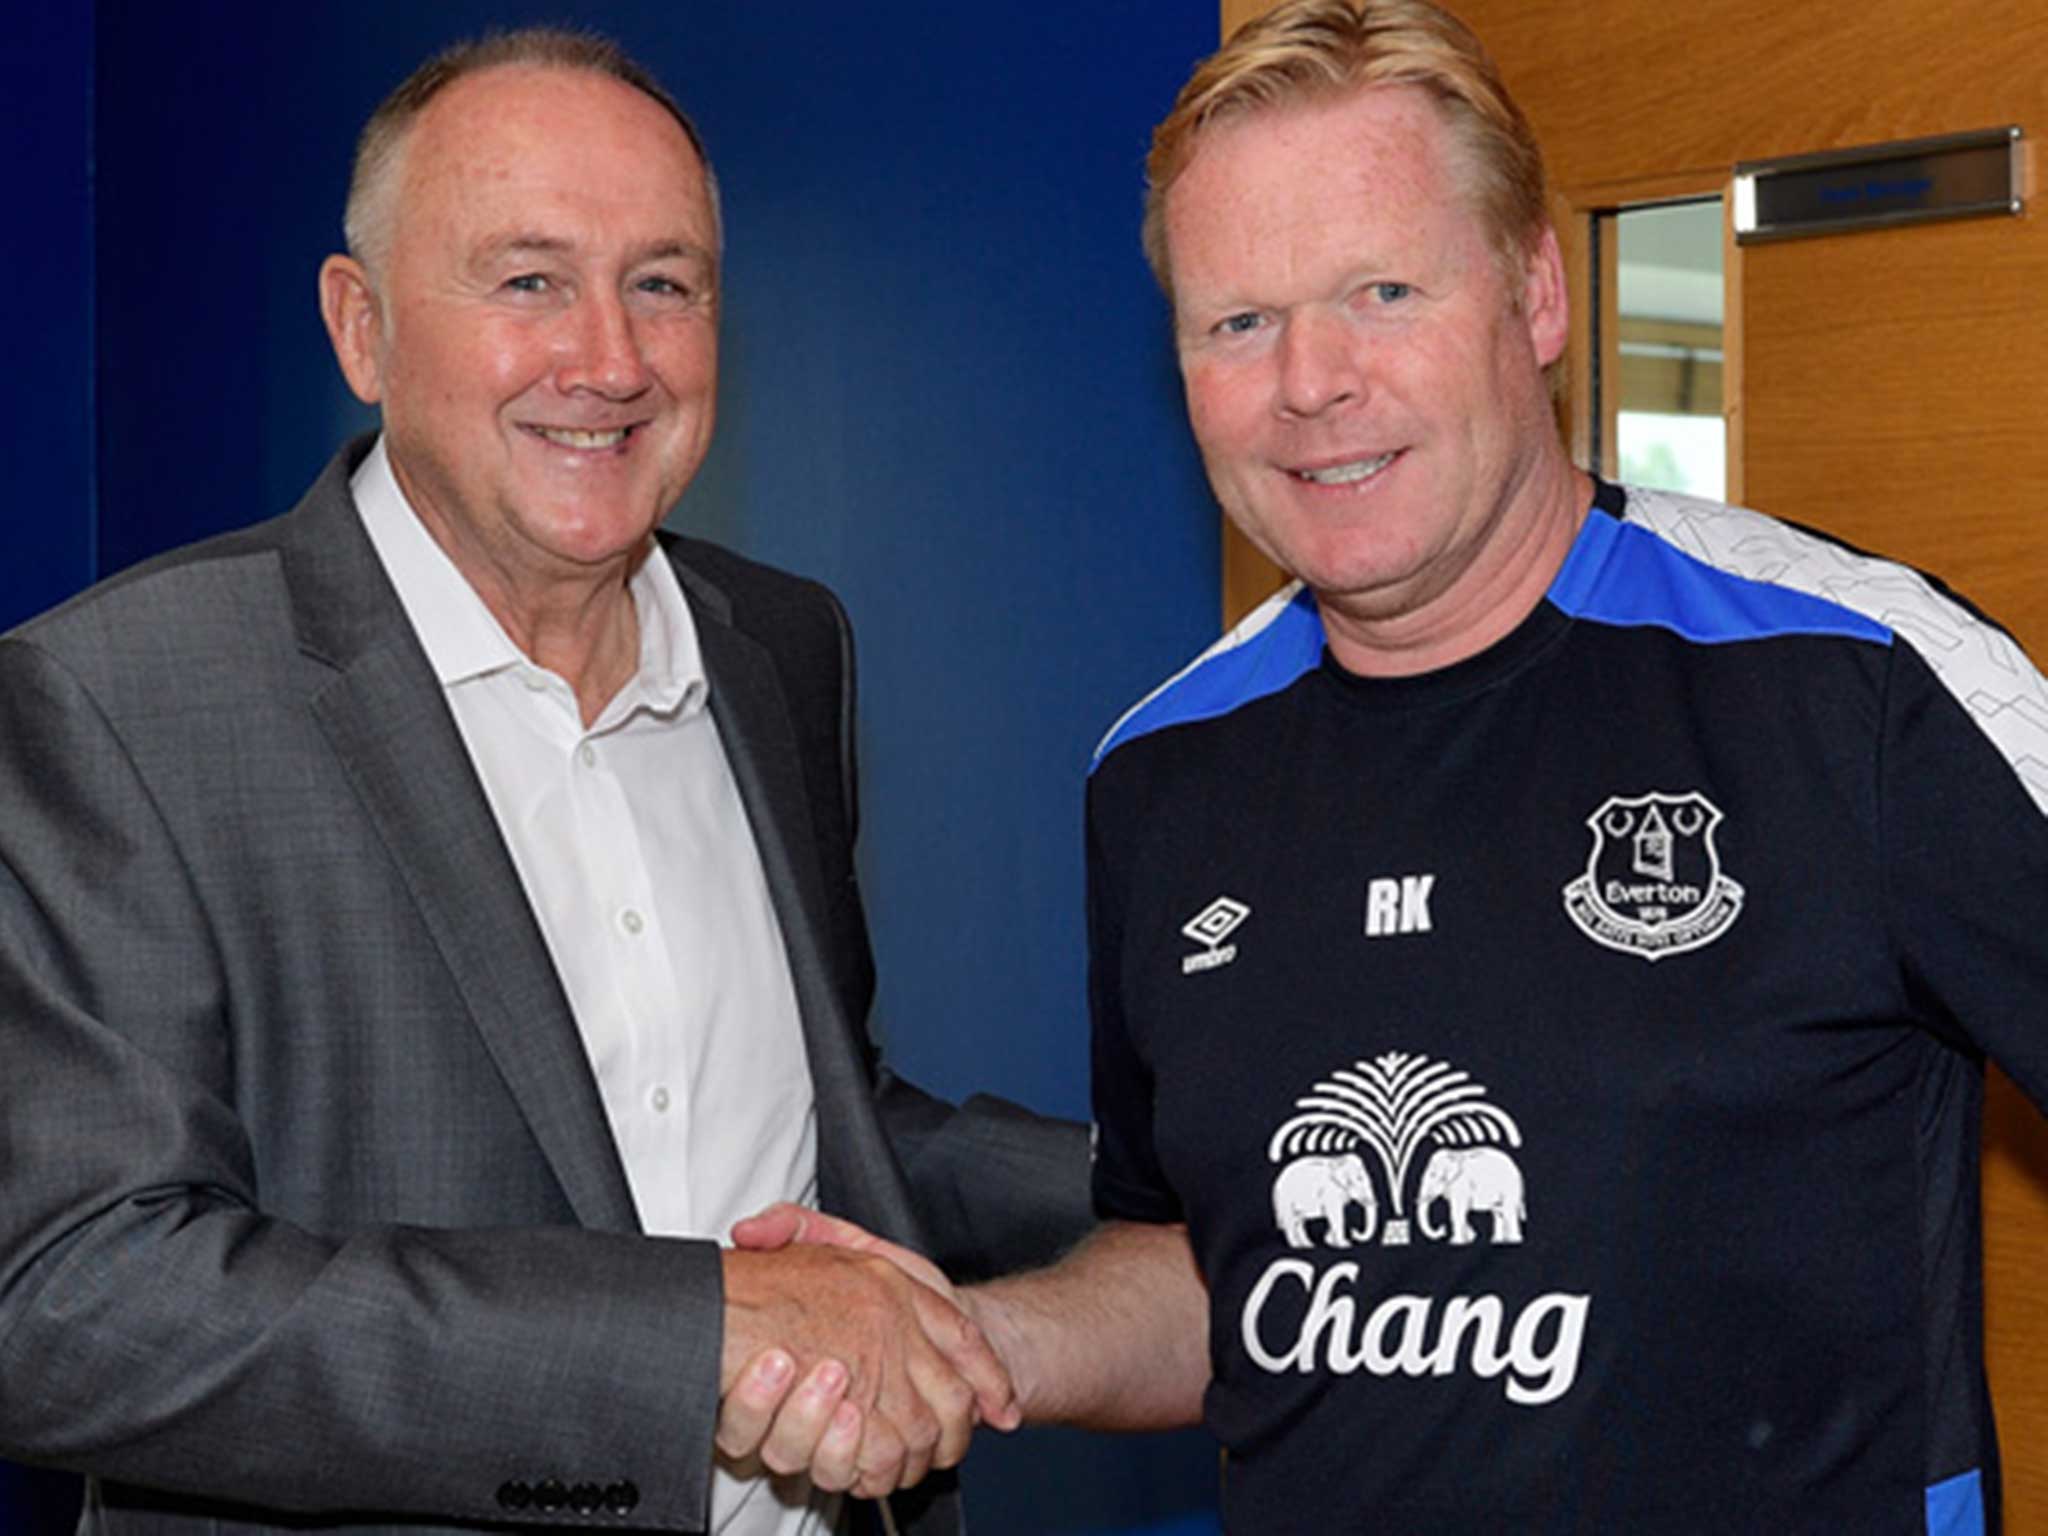 Steve Walsh and Ronald Koeman will be a formidable team at Everton